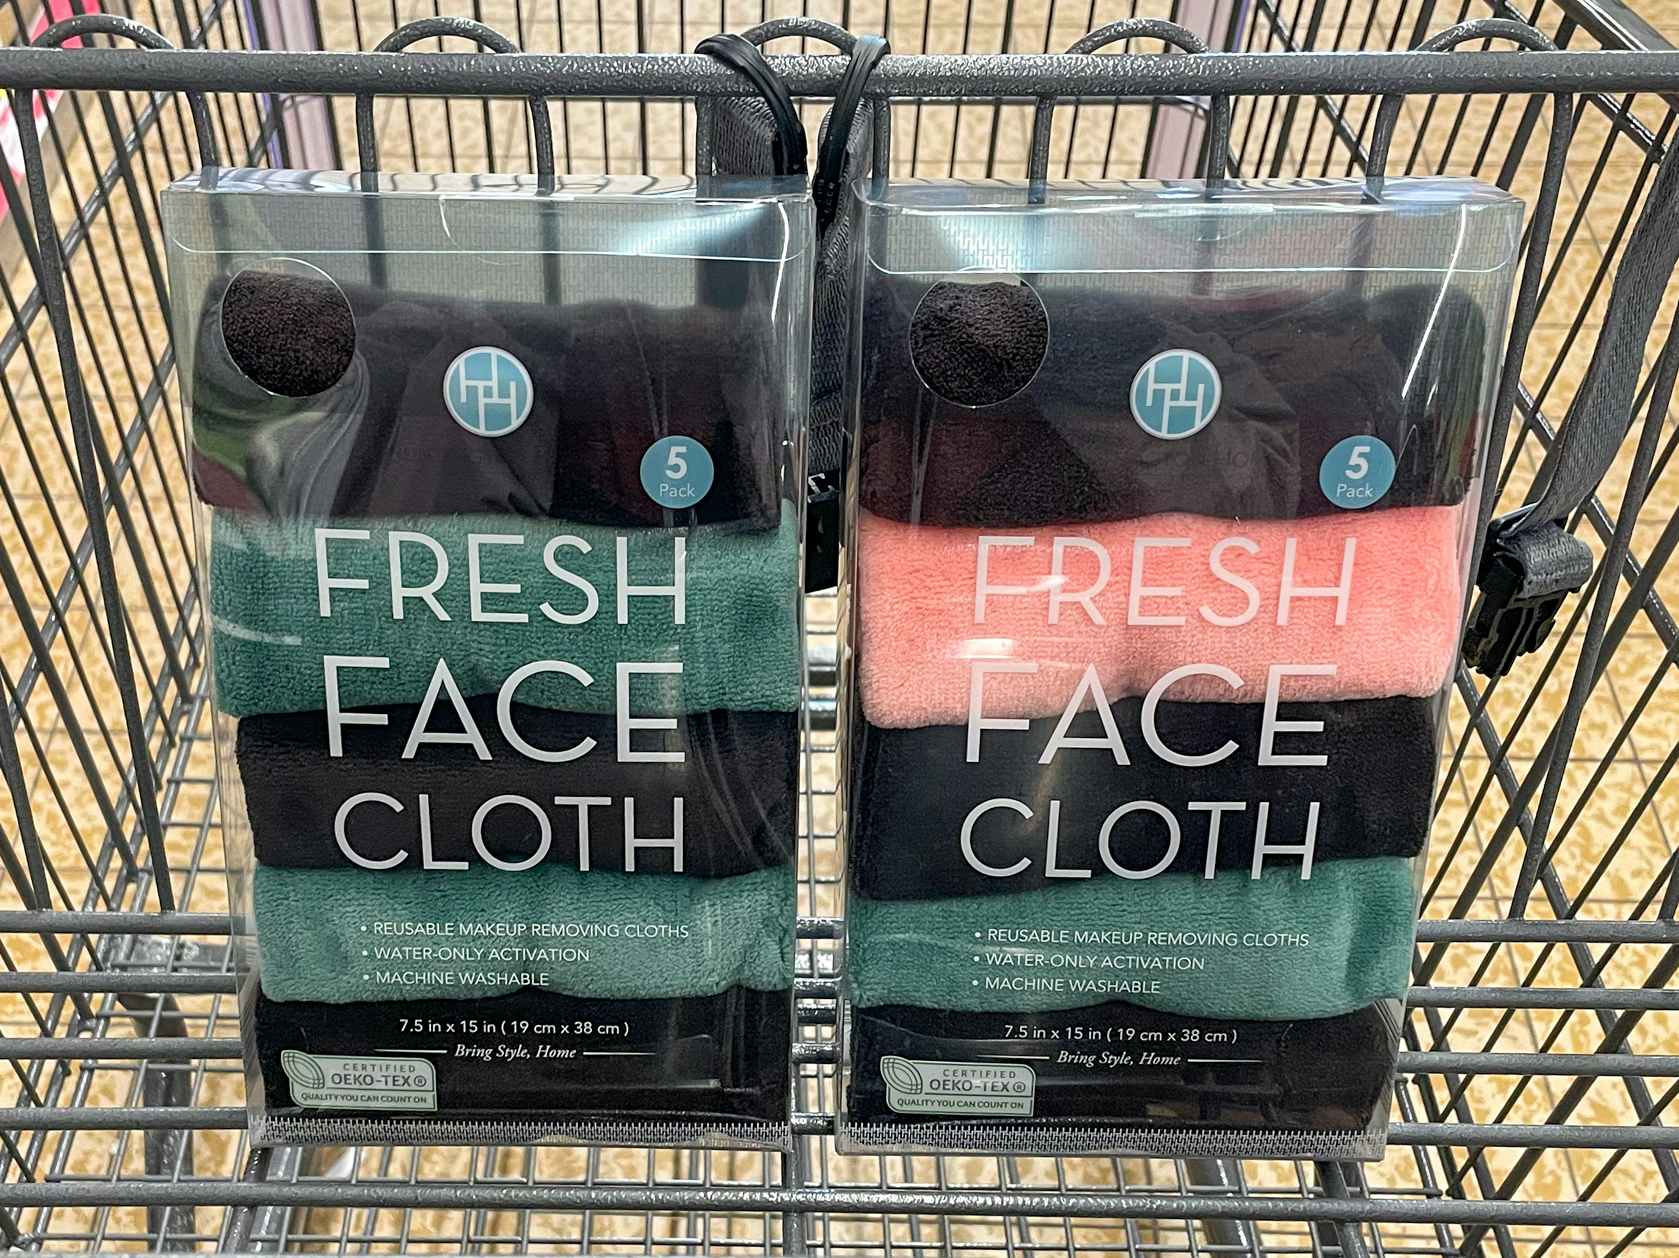 makeup removing clothes in package in a cart at aldi